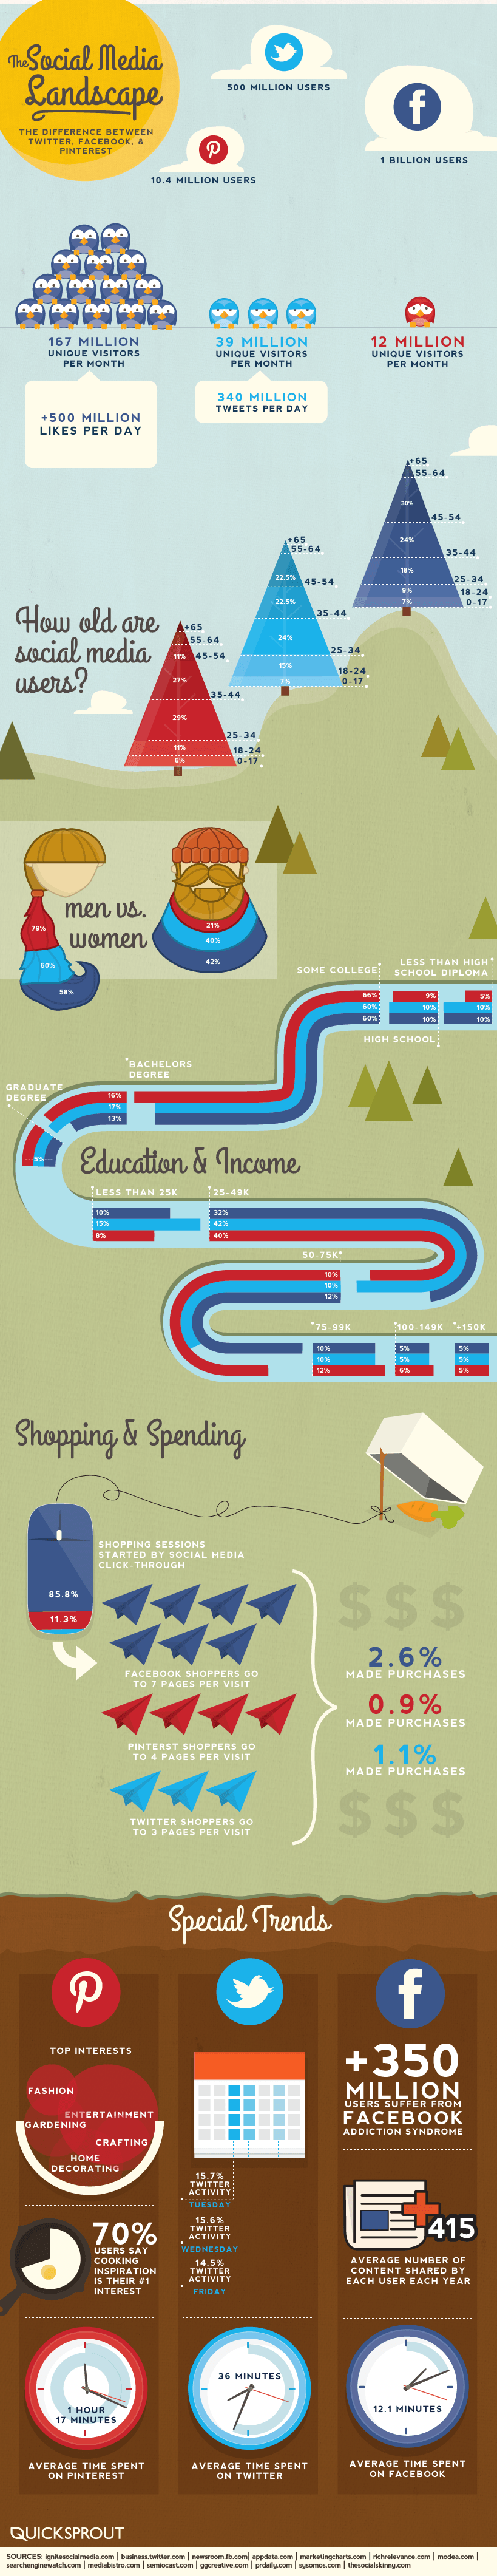 How You Should Spend Your Marketing Budget: Facebook vs Twitter vs Pinterest